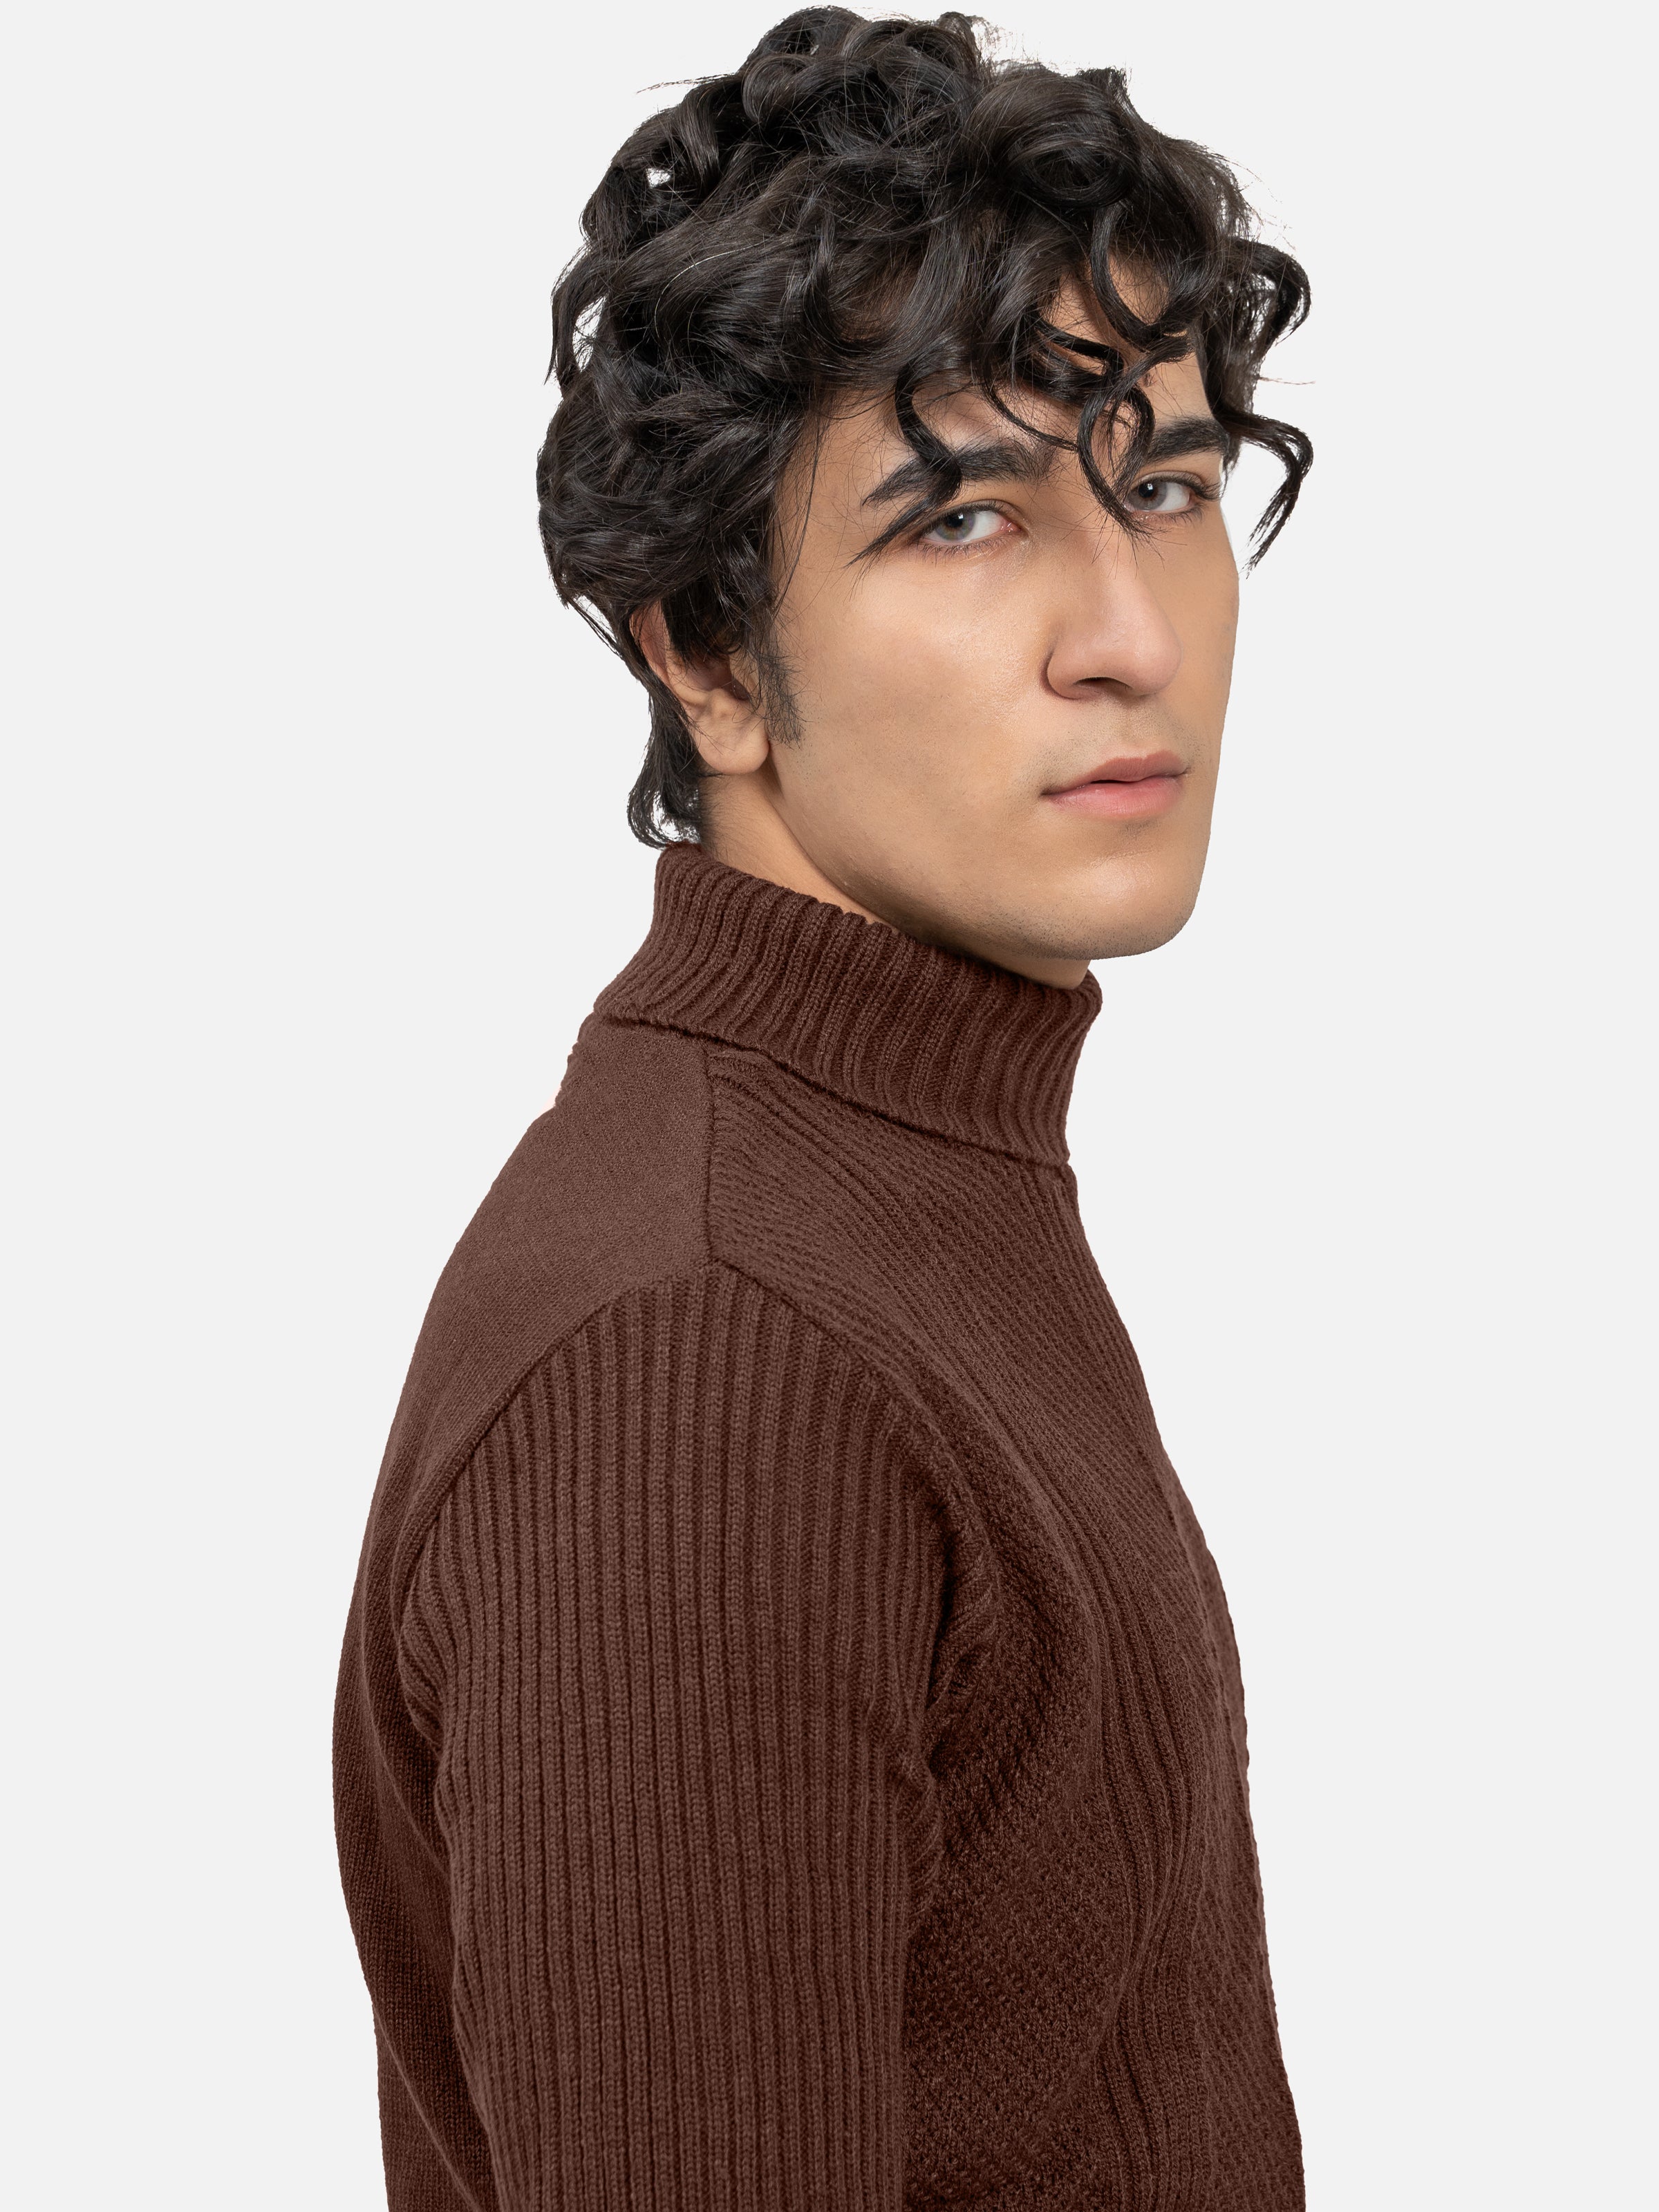 SWEATER FULL SLEEVE HIGH NECK BROWN